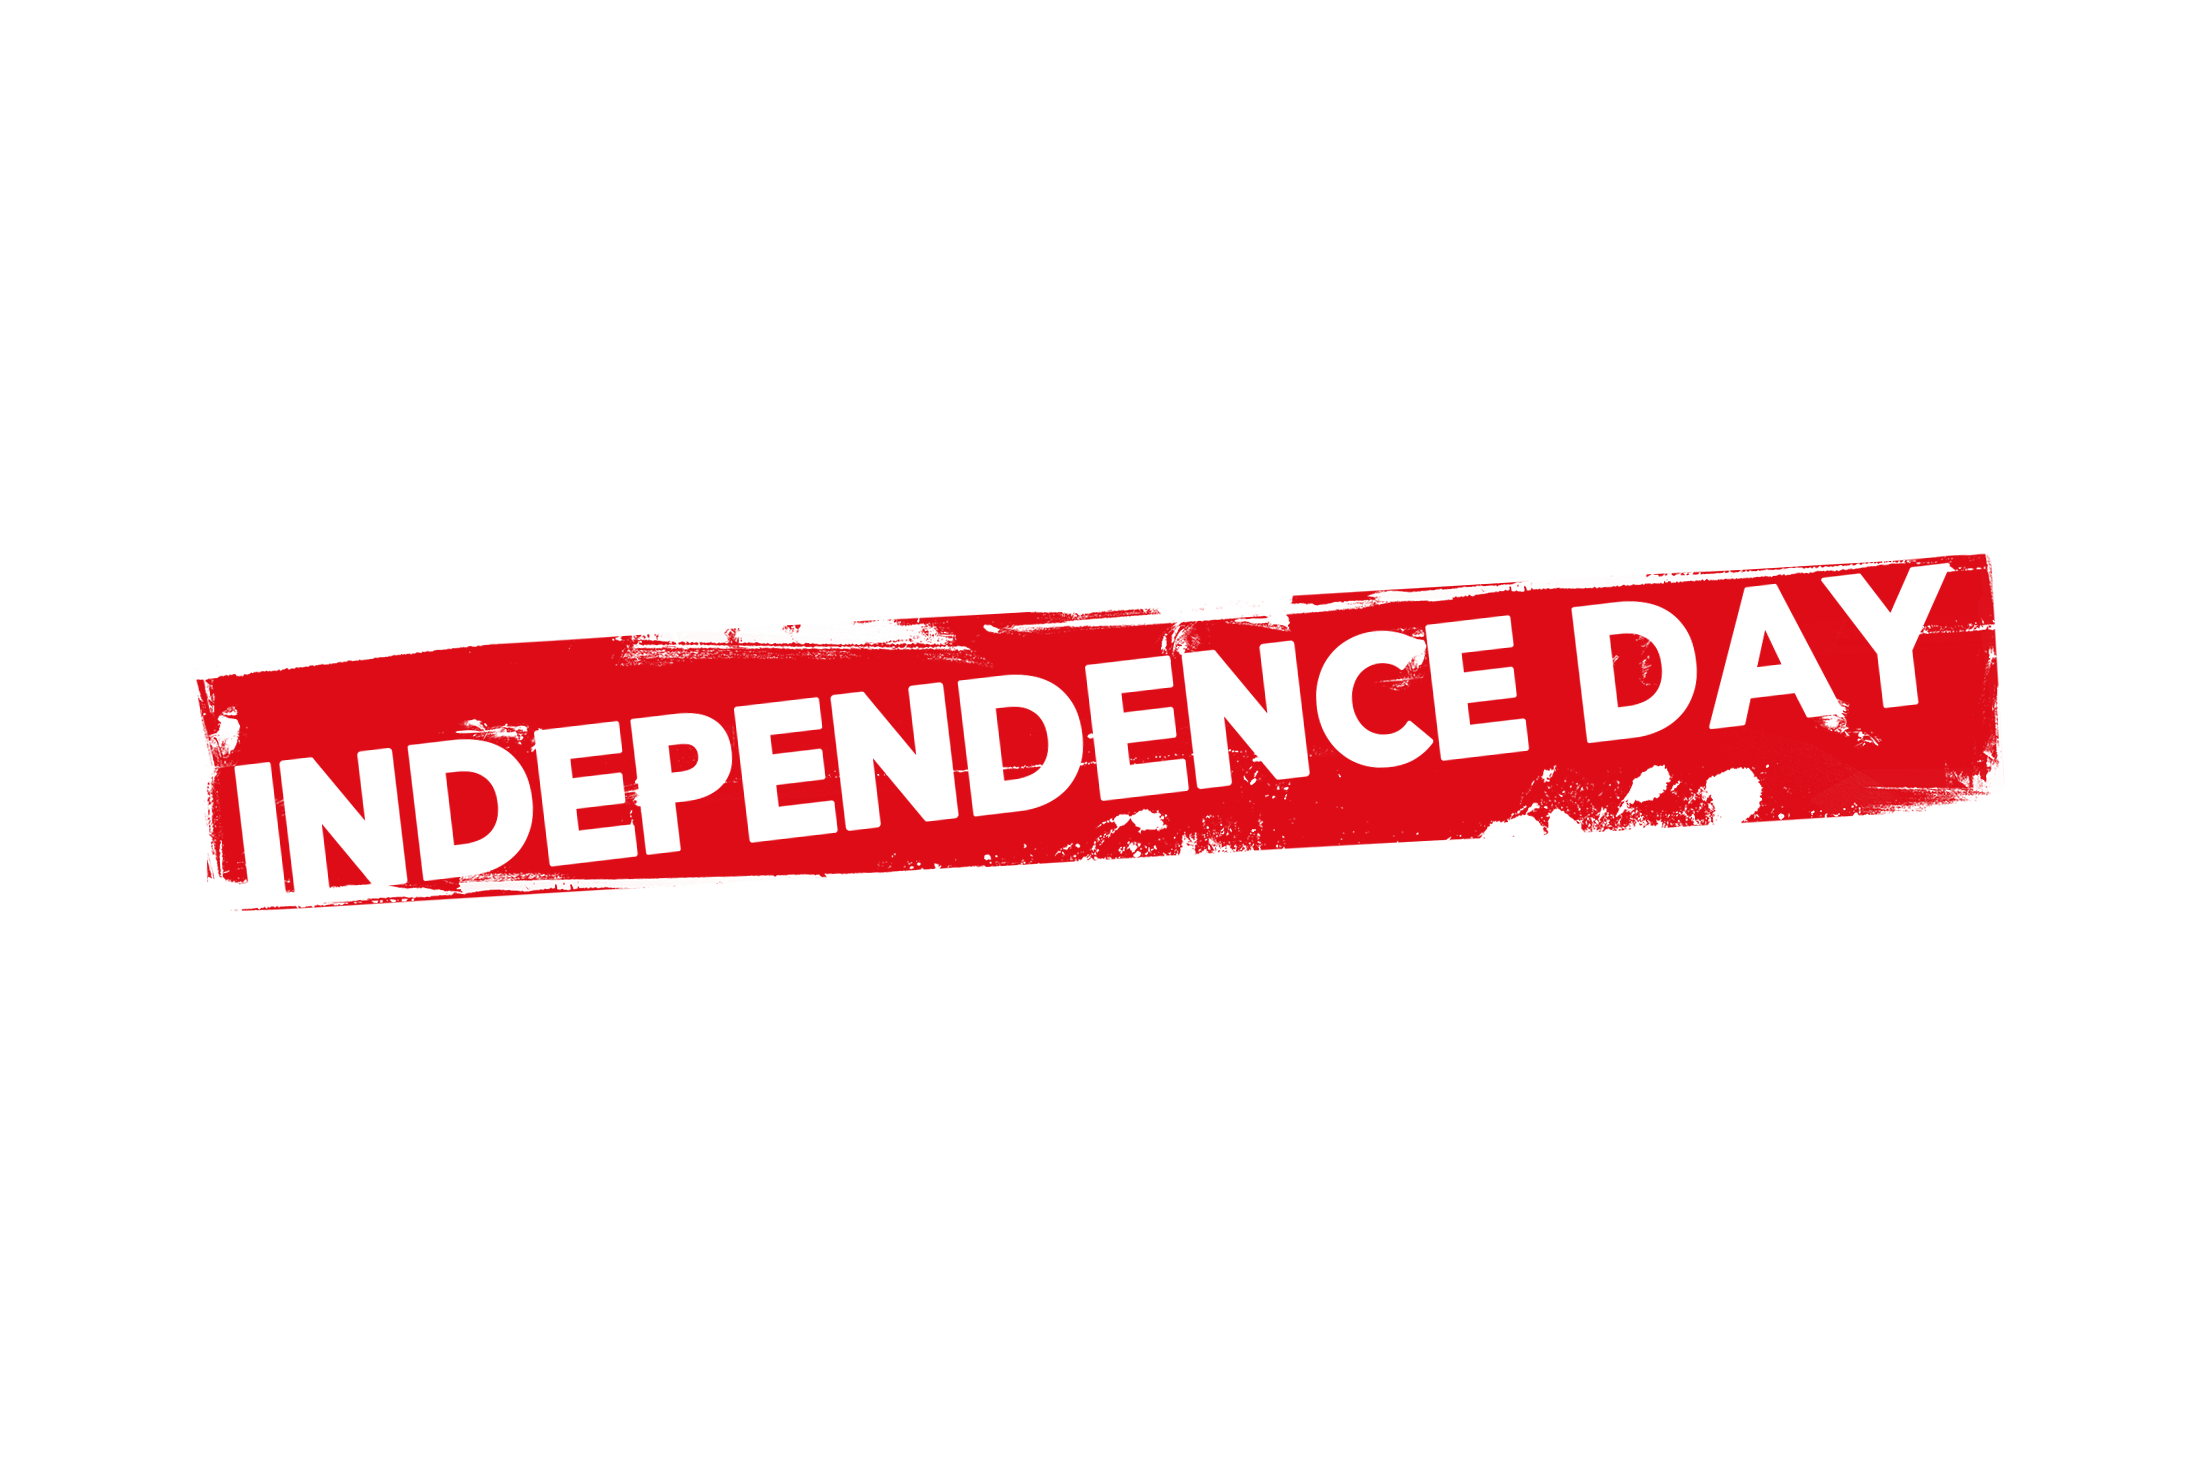 Grunge independence day label PSD